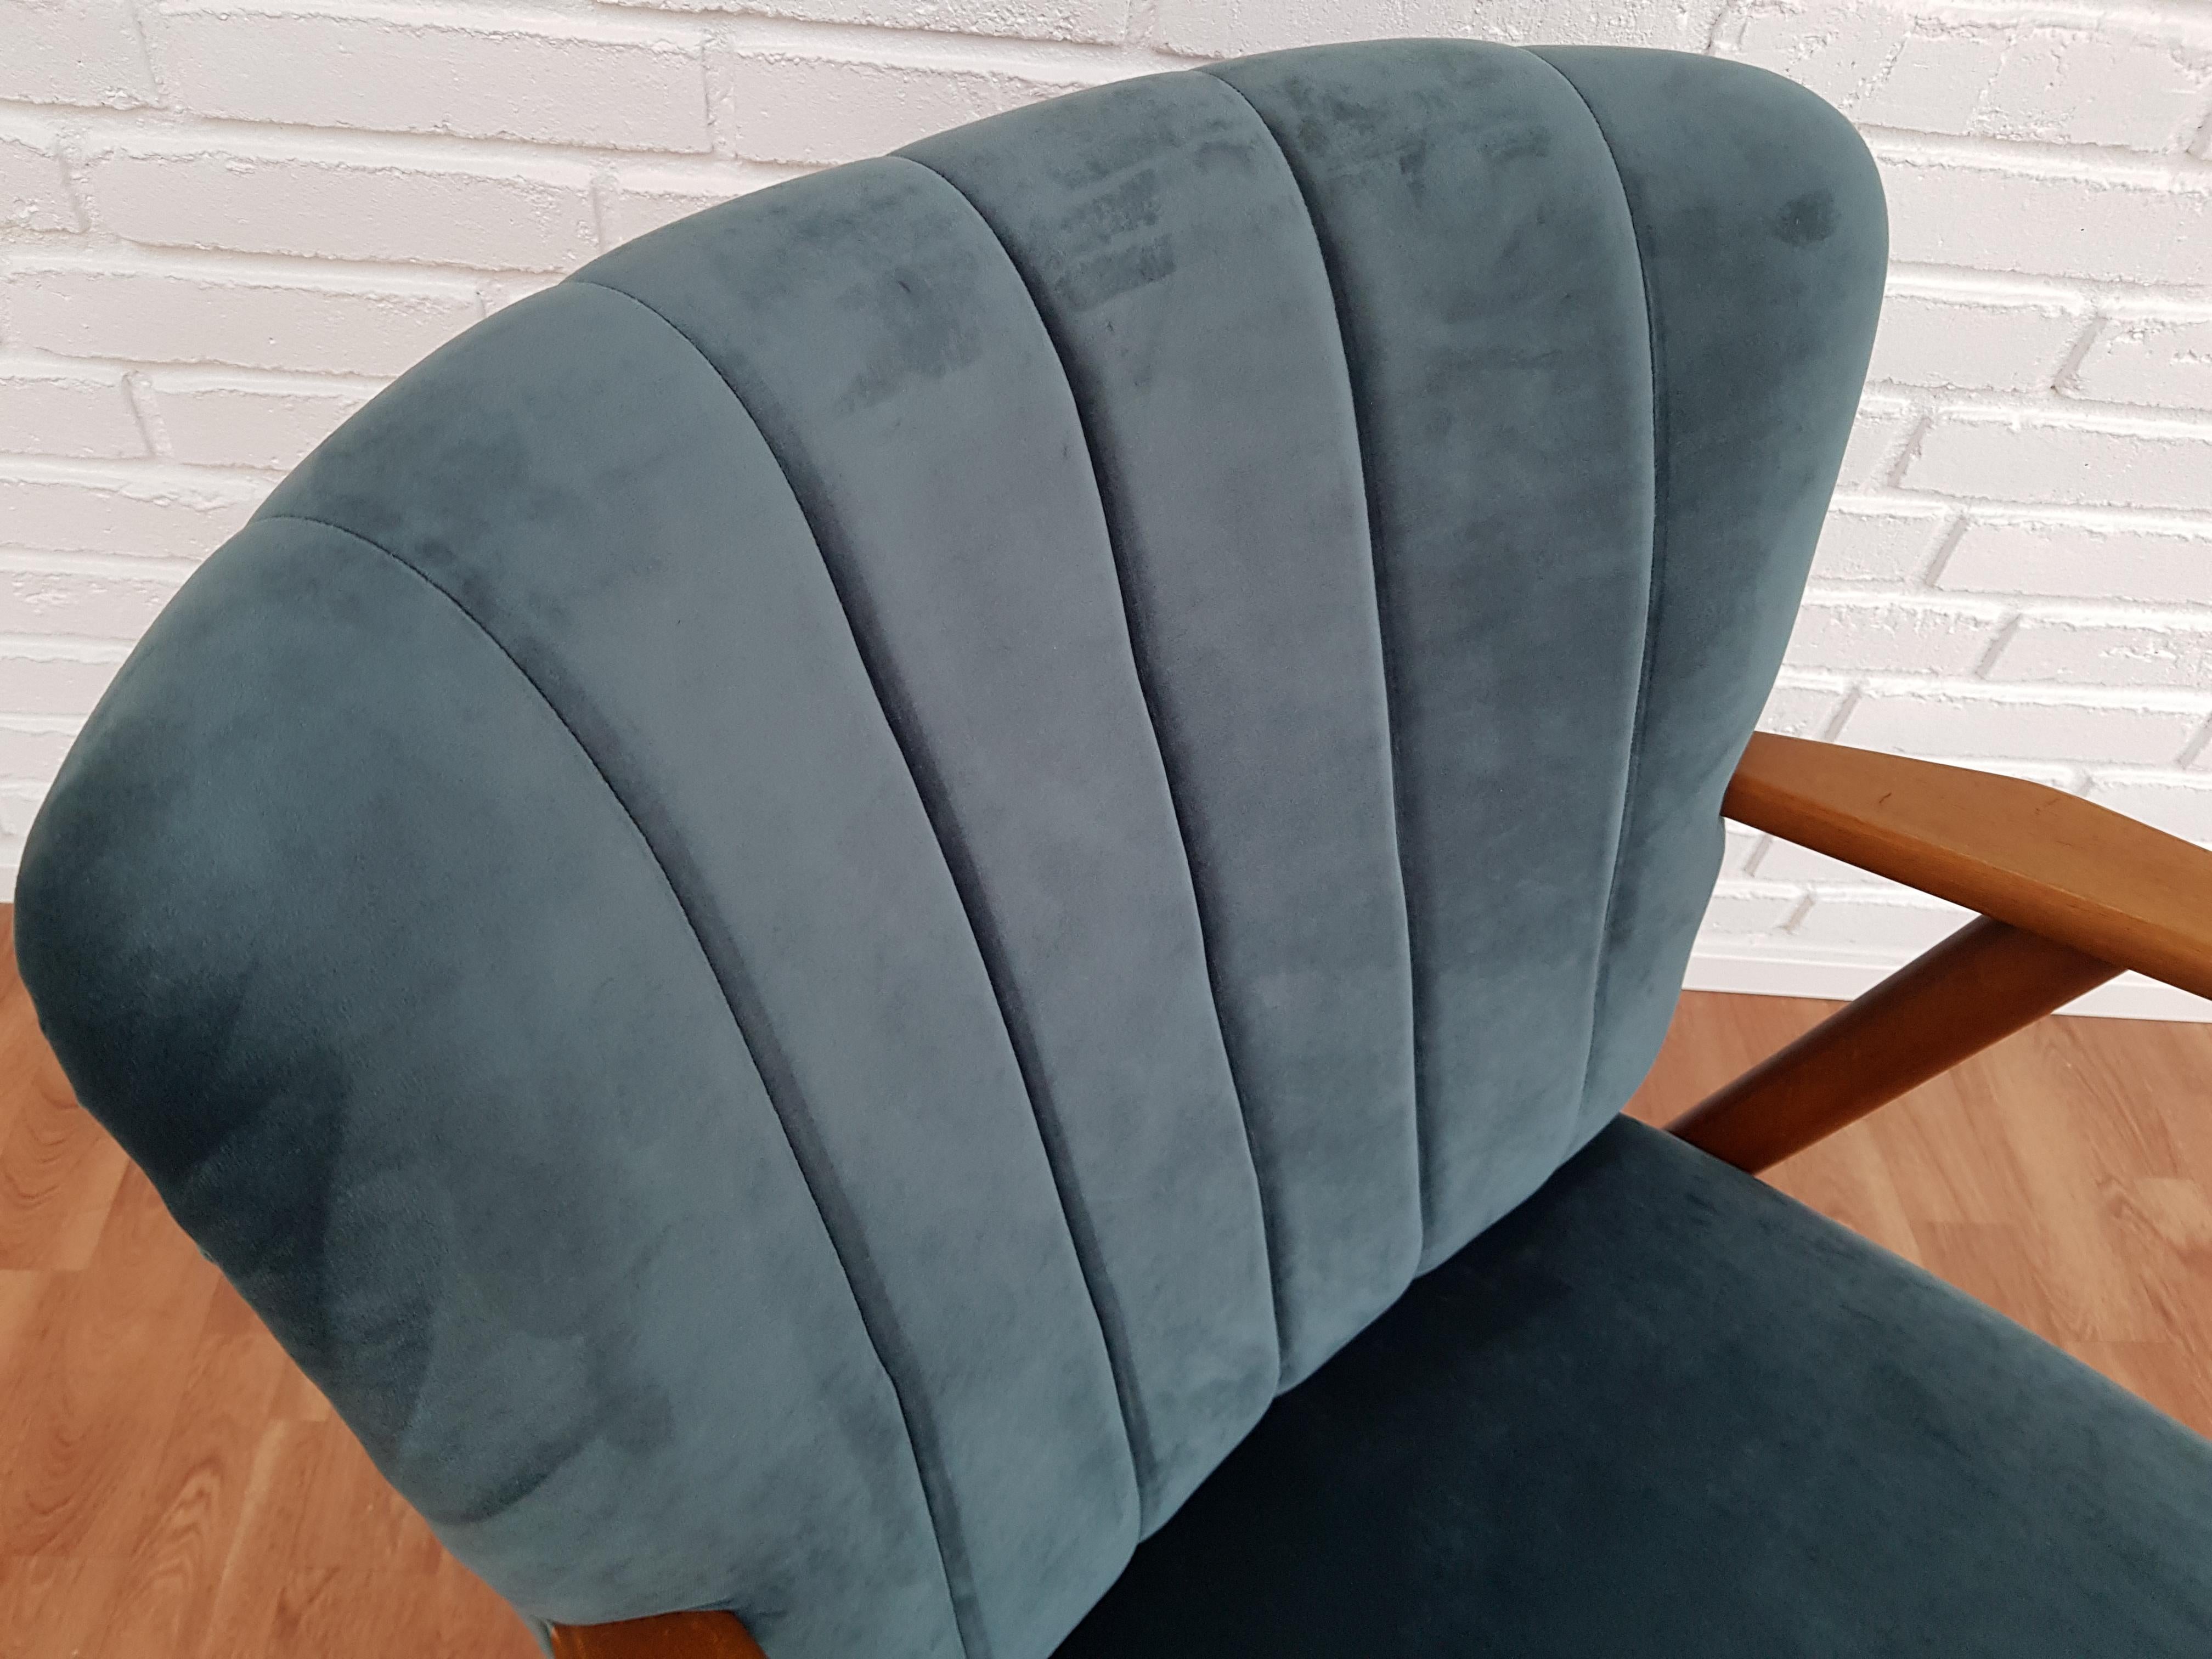 Danish designed armchair. Produced in about 1960 by the Danish furniture manufacturer. Beech wood. Completely renovated by craftsman, furniture upholsterer at Retro Møbler Galleri. Brand new padding. New reupholstered in quality green or blue